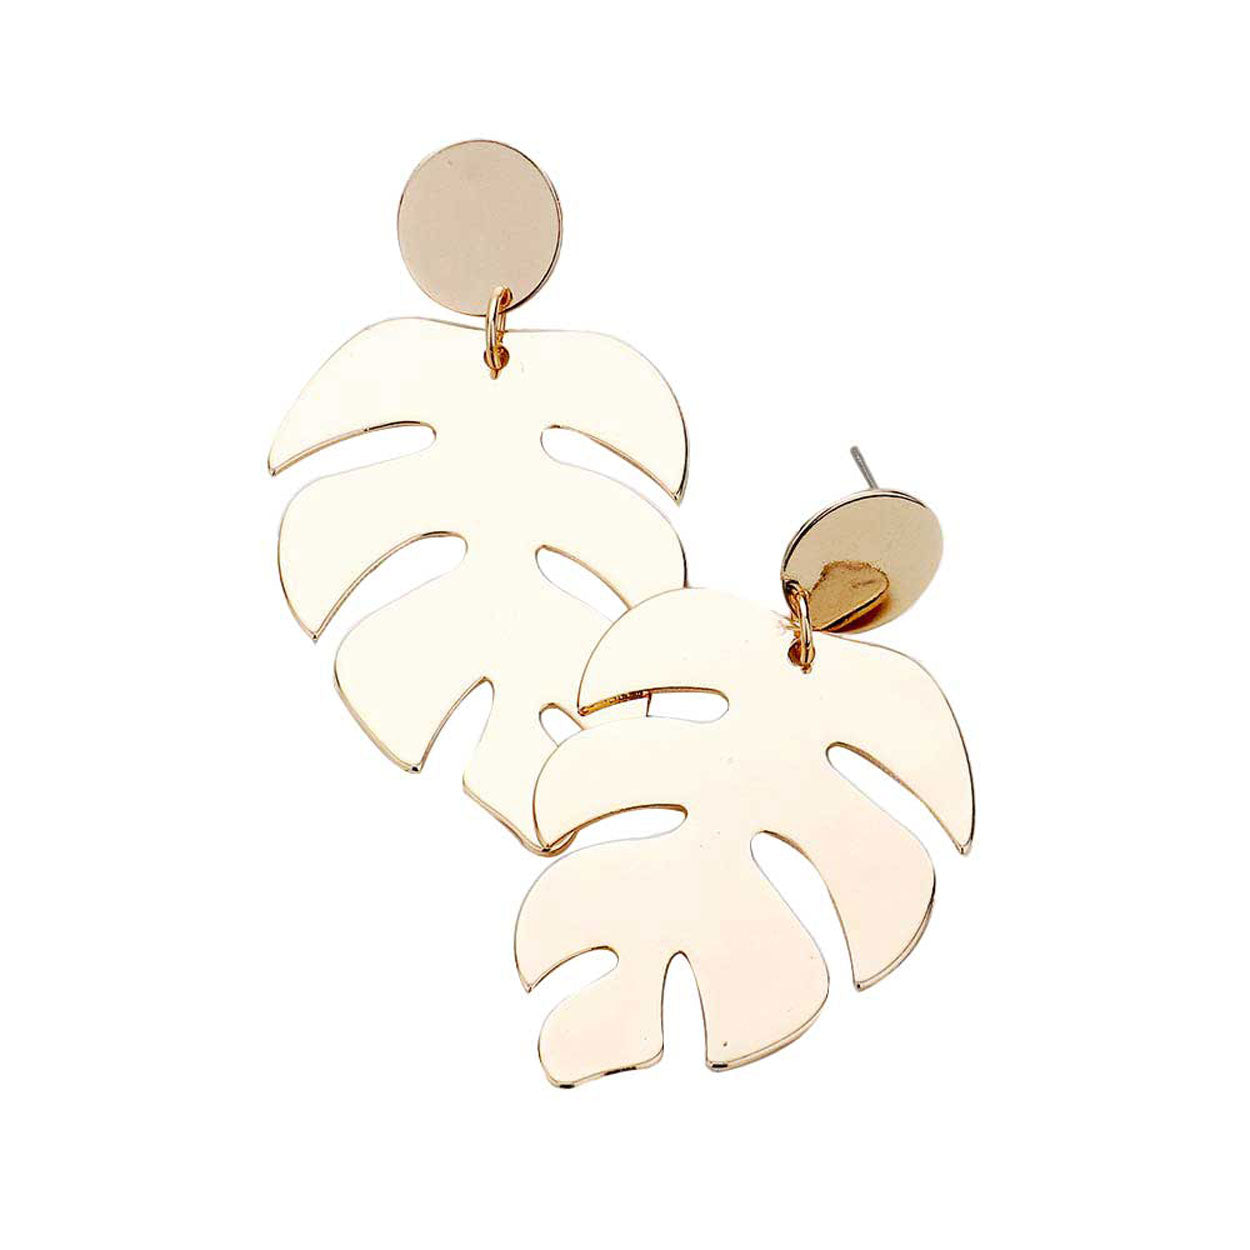 Gold Tropical Leave Metal Earrings. The perfect assortment of beautiful earrings, pair these glitzy studs with any ensemble for a polished & sophisticated look. Beautifully crafted design adds a gorgeous glow to any outfit.  Ideal for dates, Birthday Gift, Anniversary Gift, Mother's Day Gift, Graduation Gift, Just Because Gift, Thank you Gift.